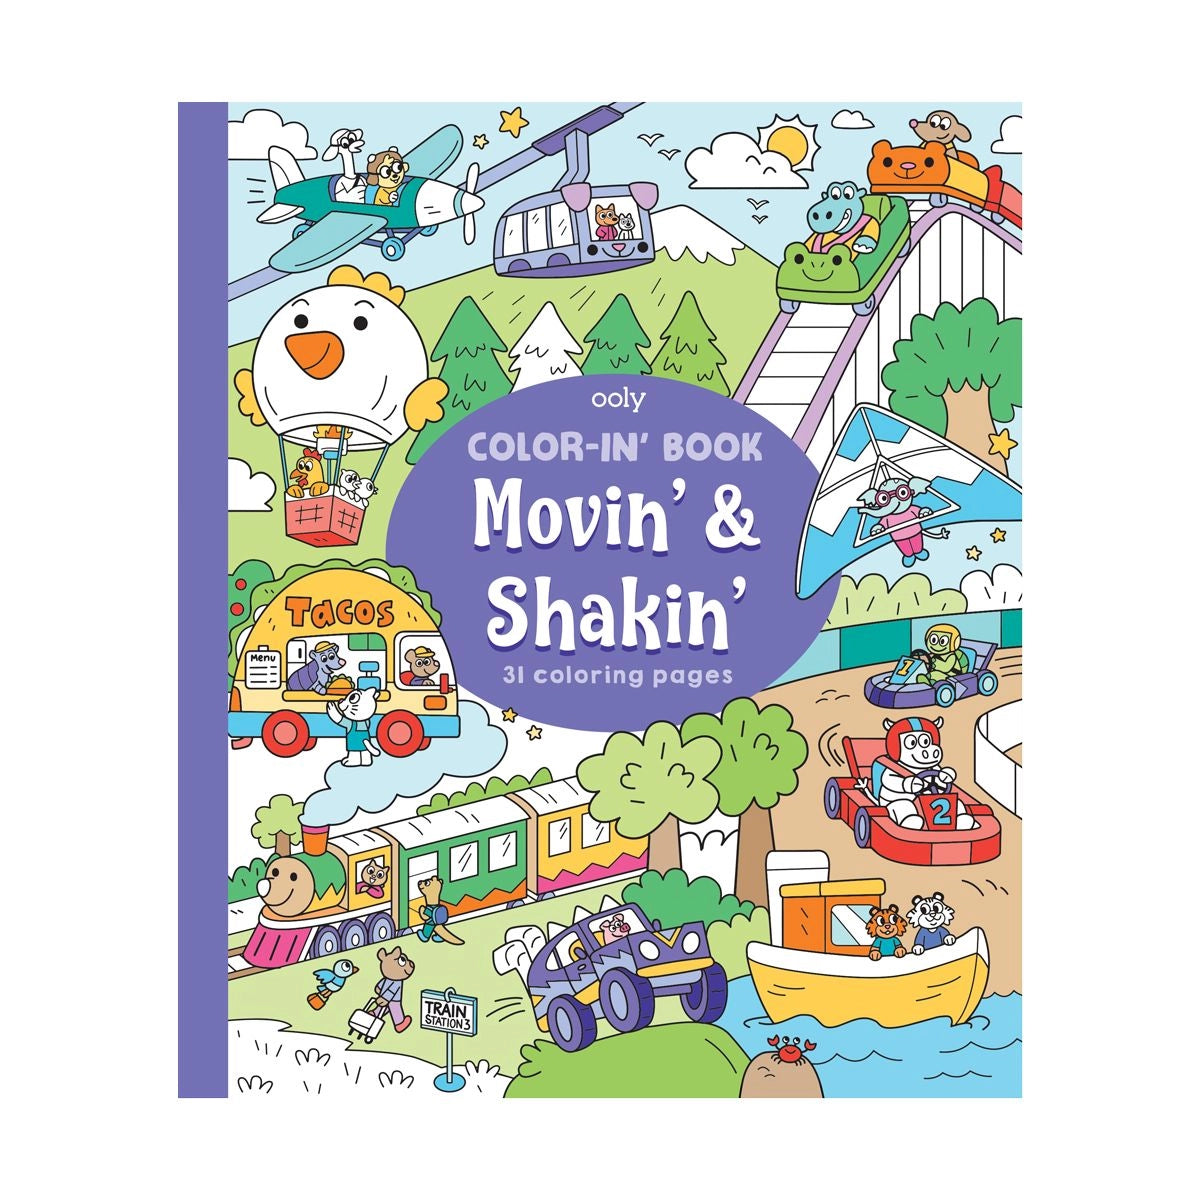 Movin' & Shakin Coloring Book 196 TOYS CHILD Ooly 